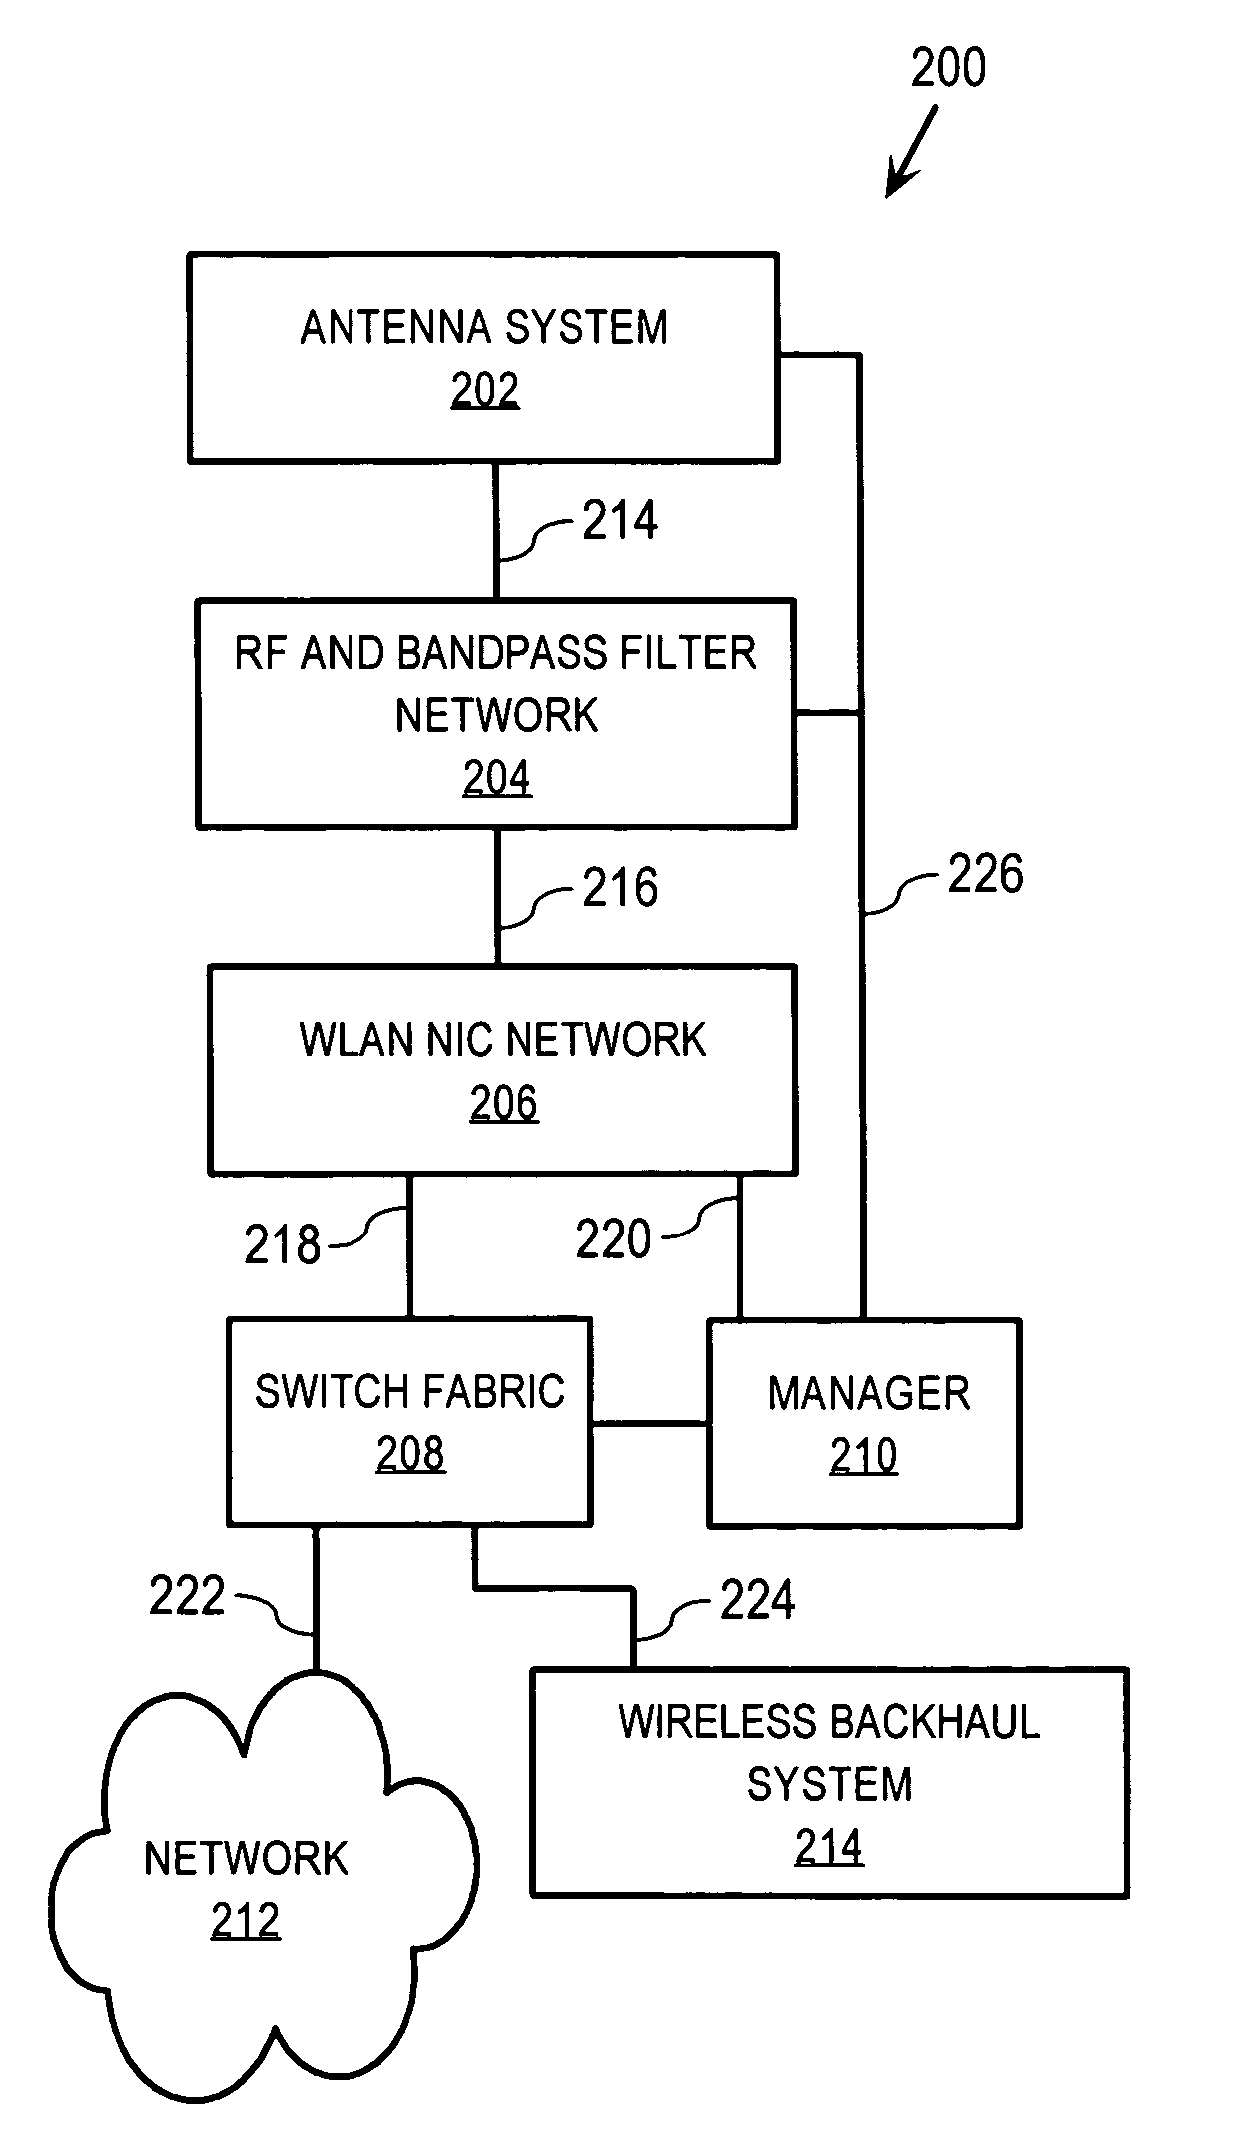 Method and apparatus for coverage and throughput enhancement in a wireless communication system